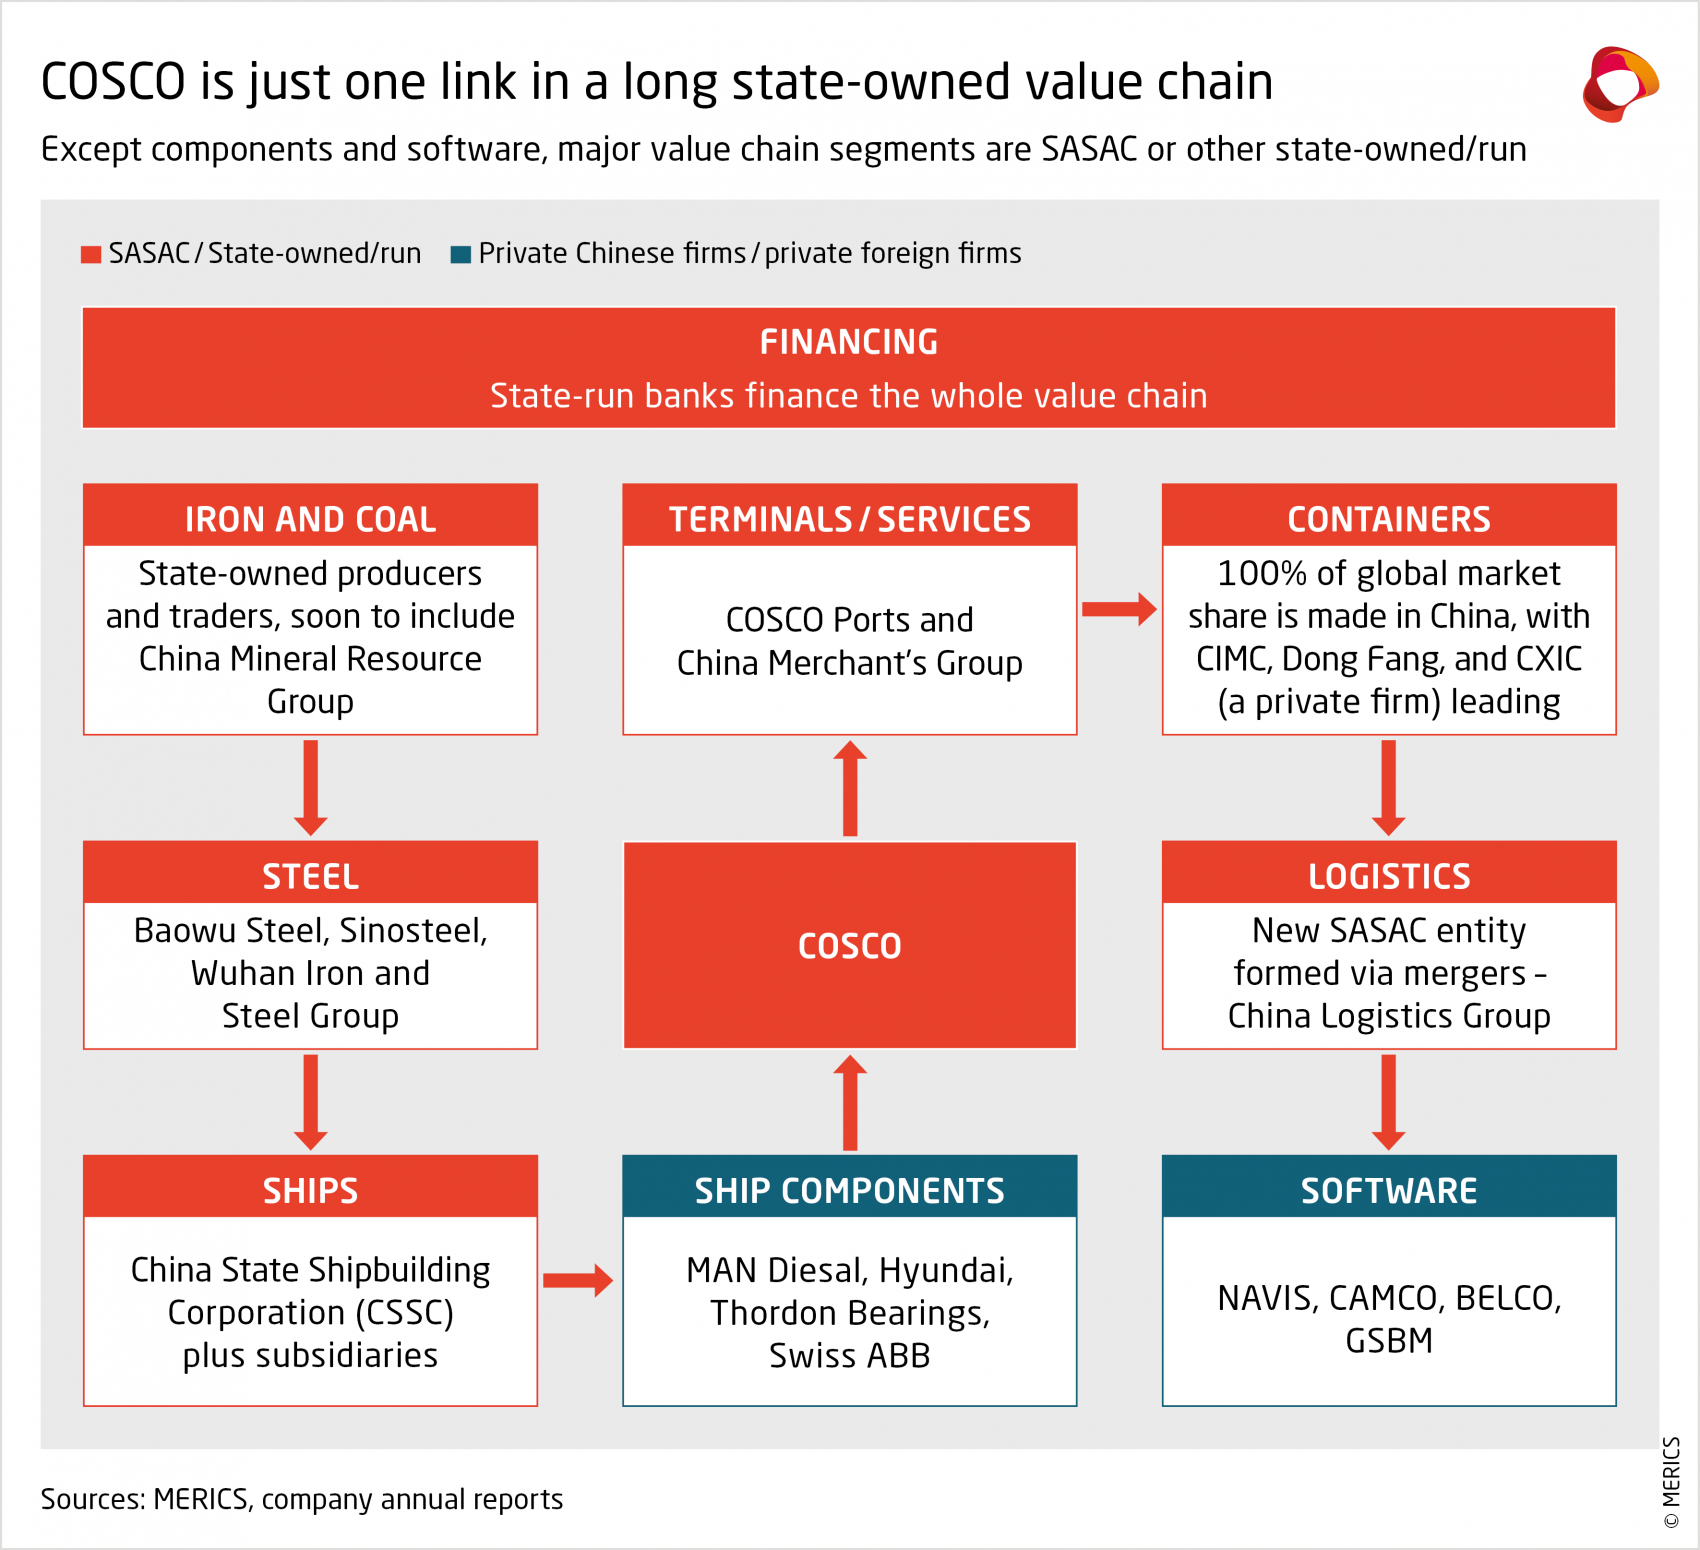 merics-report-the-party-knows-best-cosco-is-just-one-link-in-a-long-state-owned-value-chain-exhibit-21.png